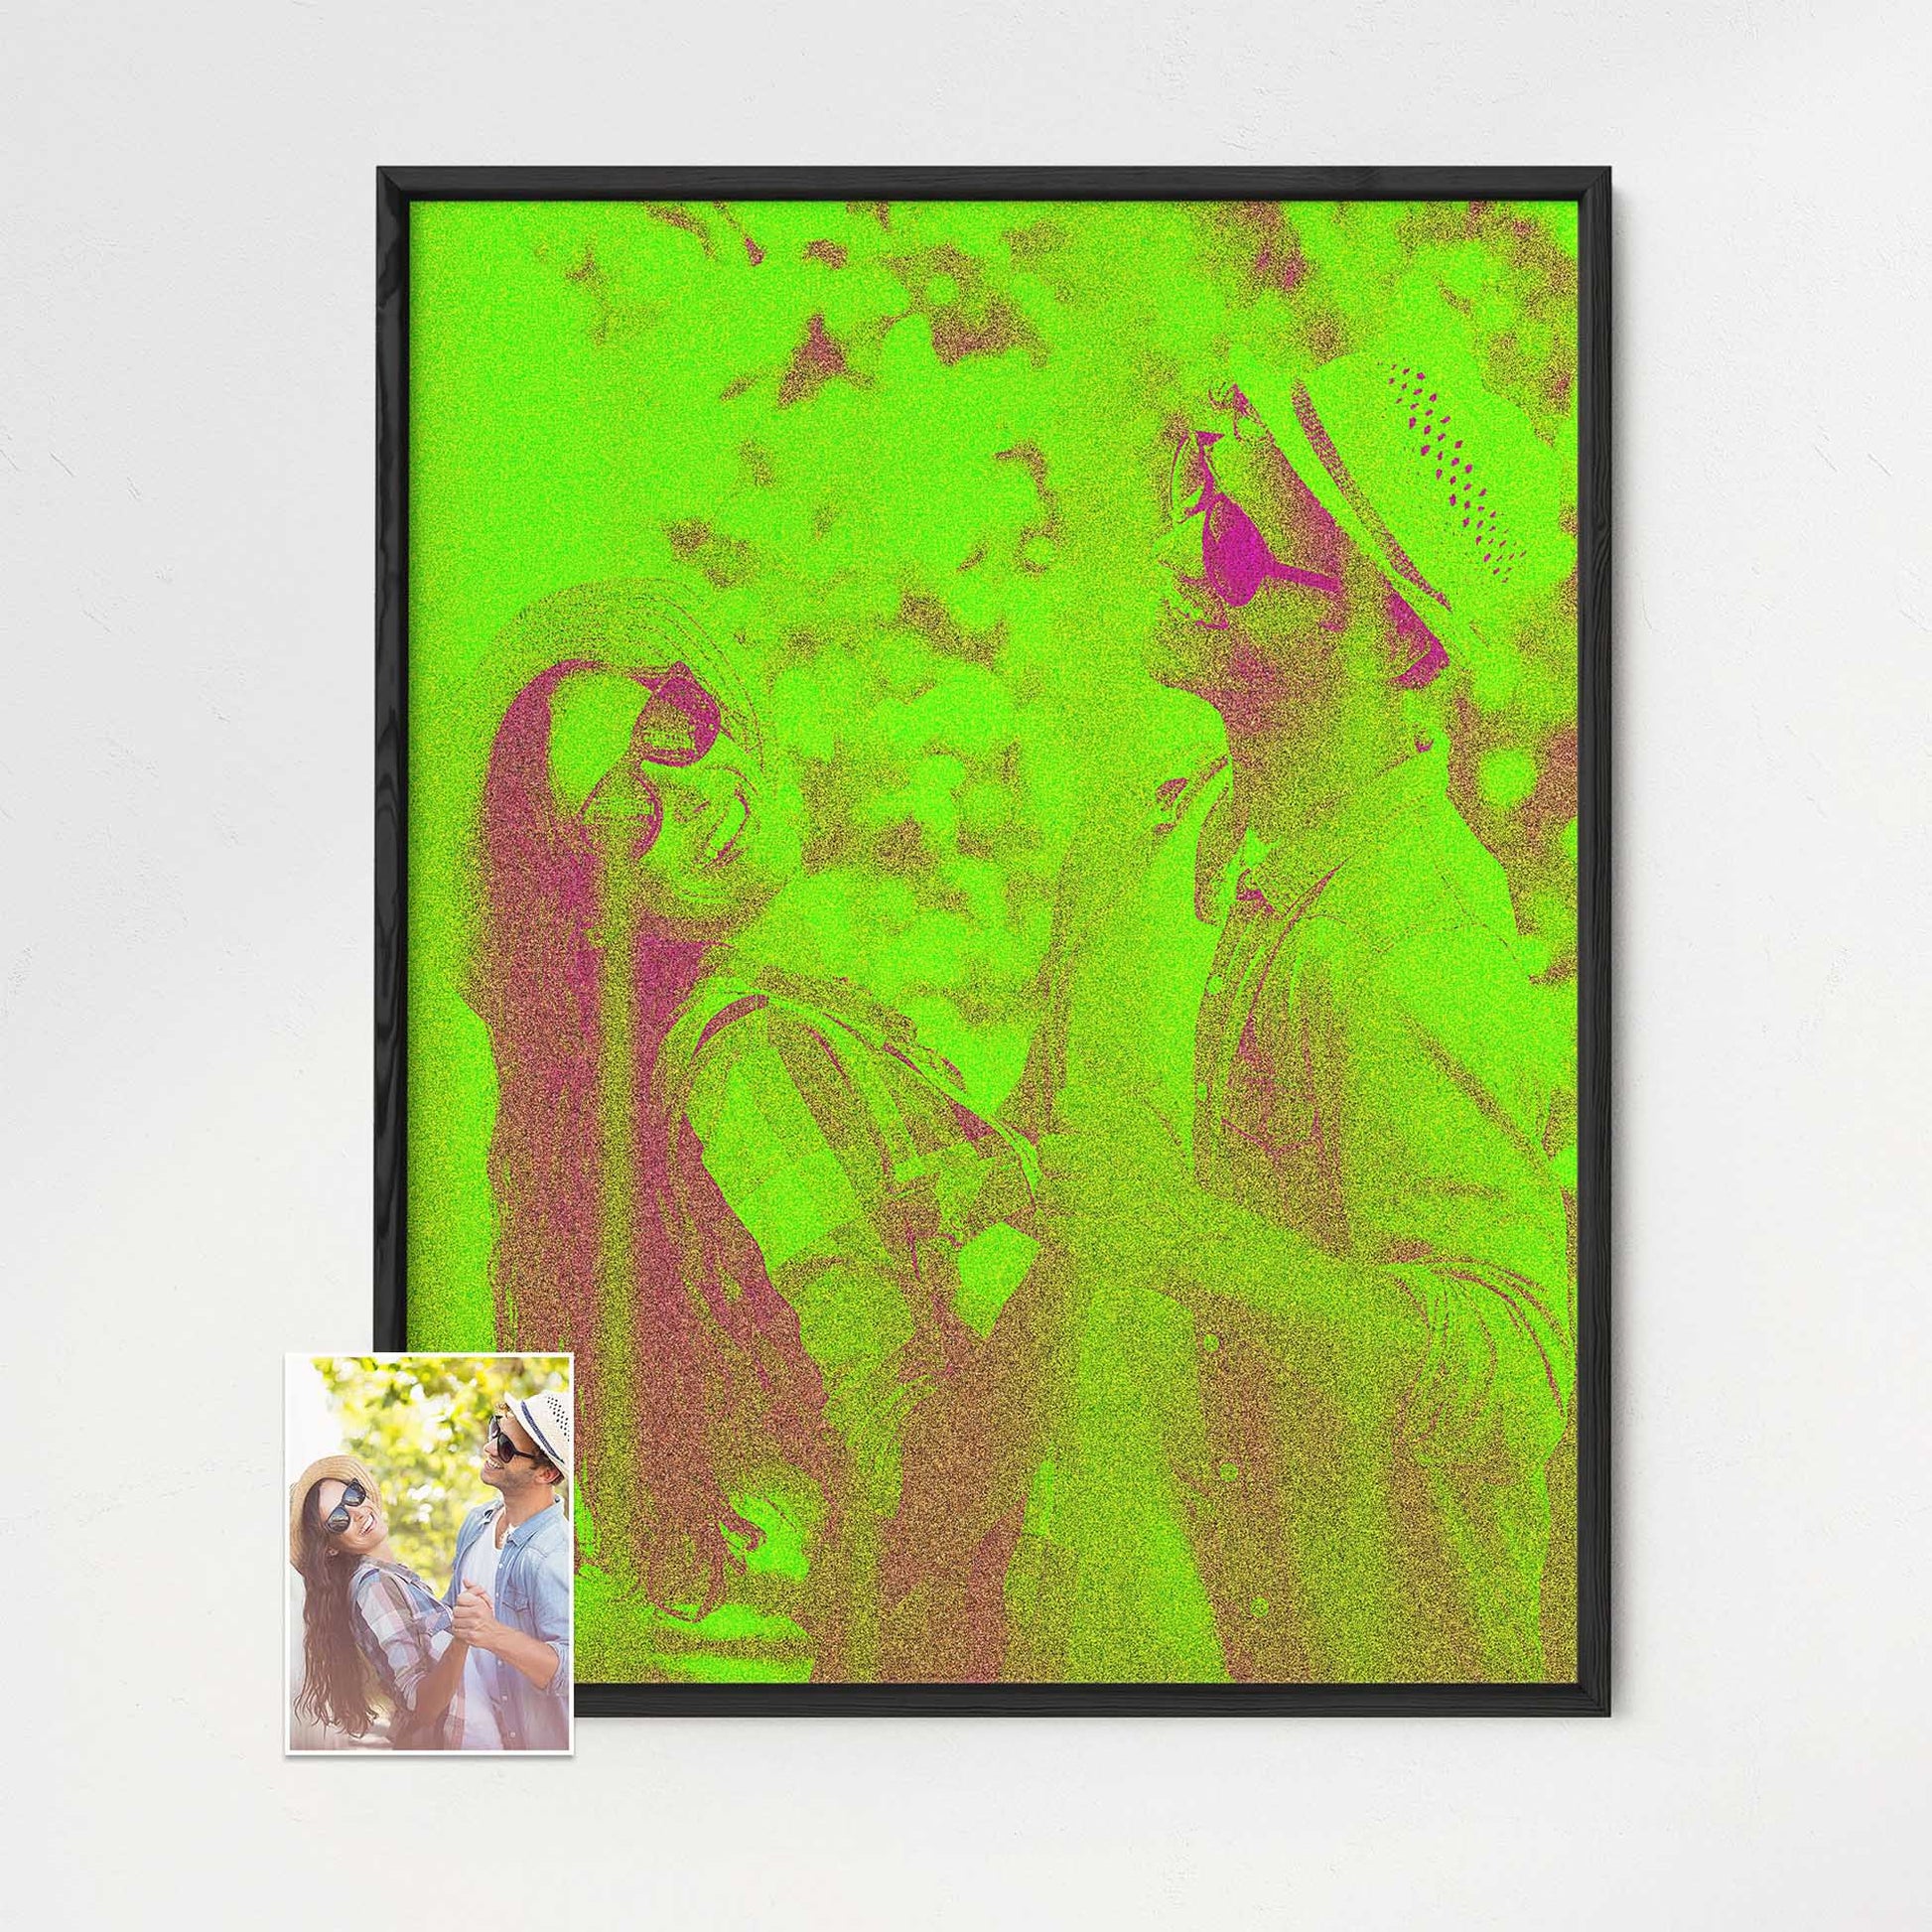 Energize your space with the vibrant charm of our Personalised Neon Green Framed Print. The eye-catching neon green hues bring a fresh and fun element to any room. Crafted from your photo, this artwork becomes a unique and captivating print